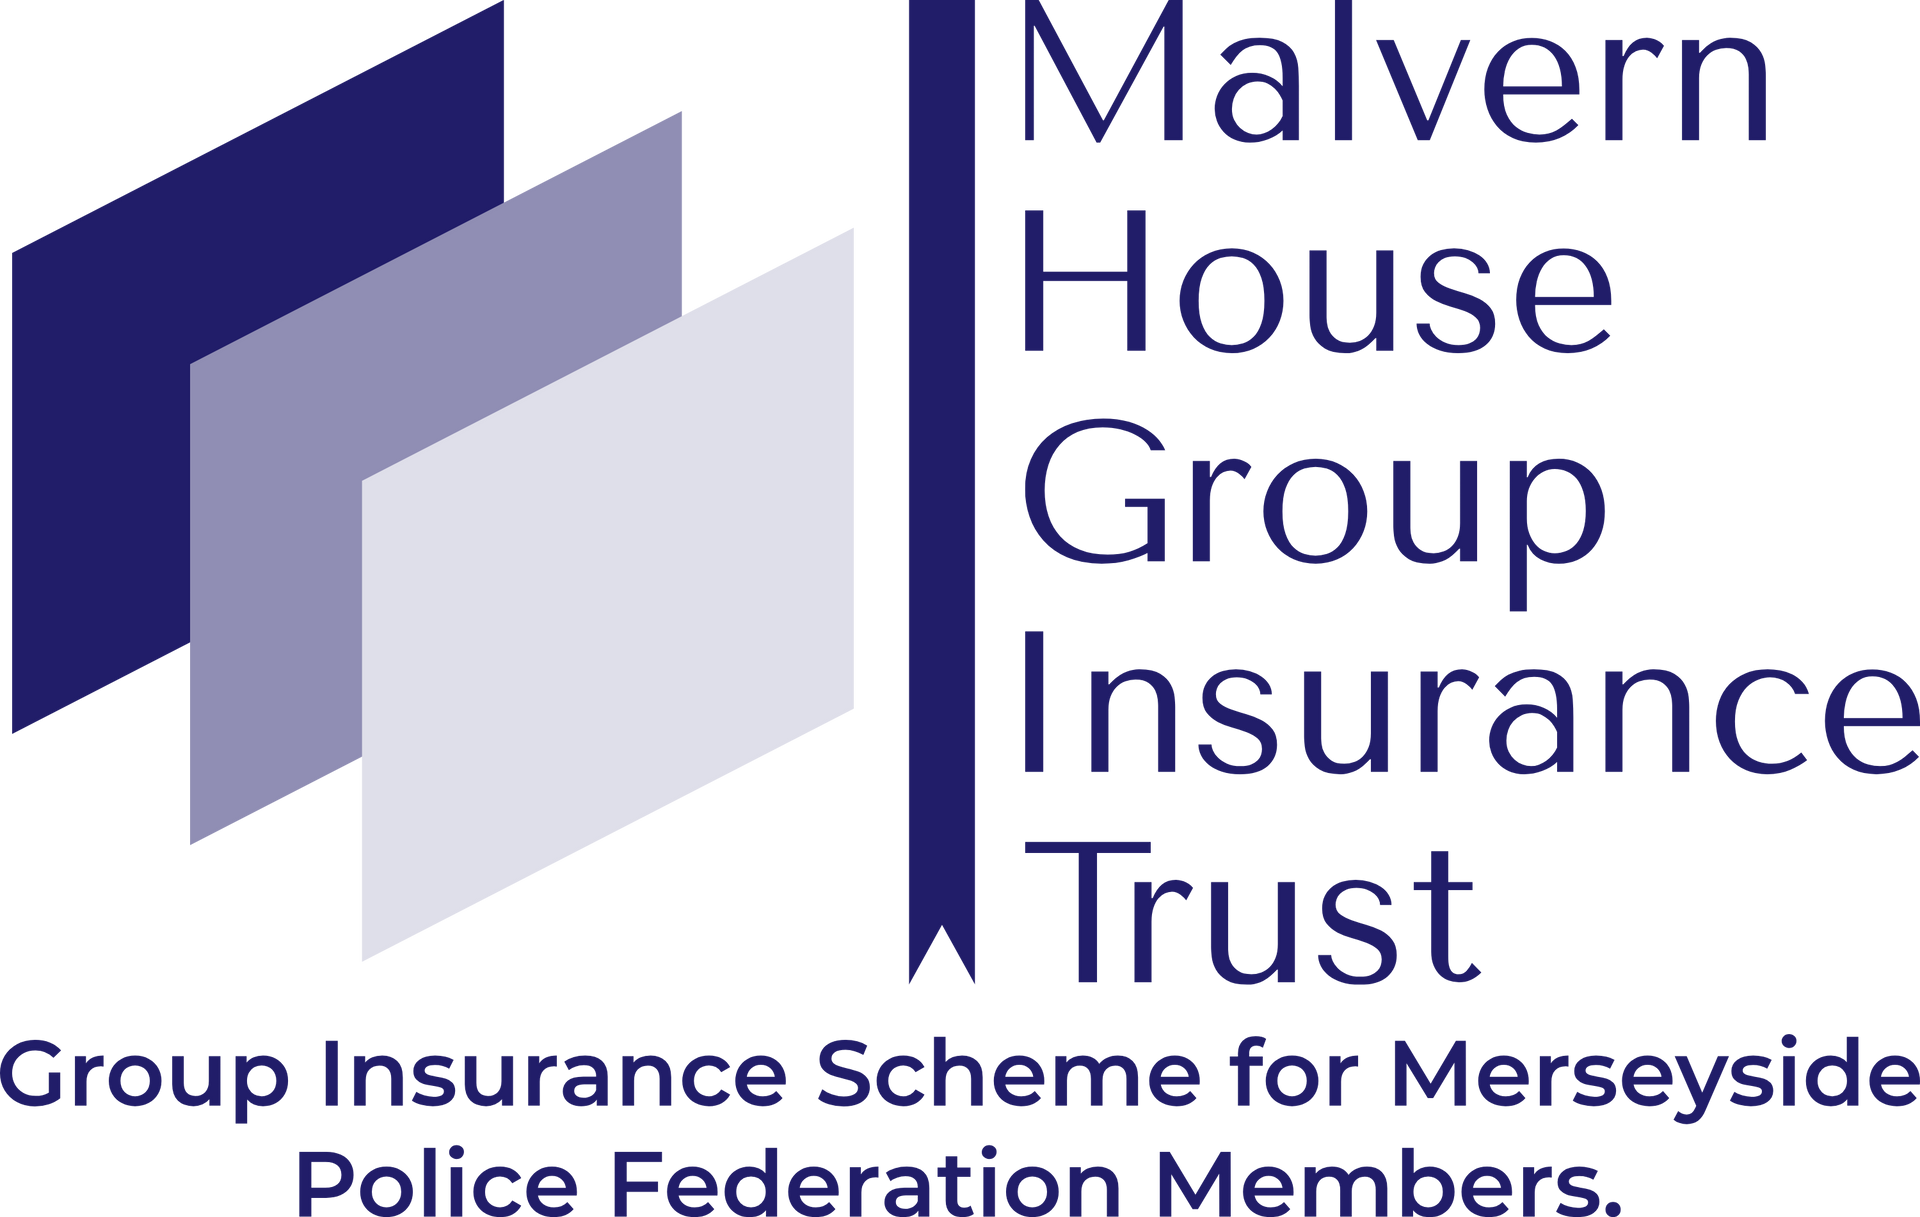 The malvern house group insurance trust logo is a group insurance scheme for merseyside police federation members.